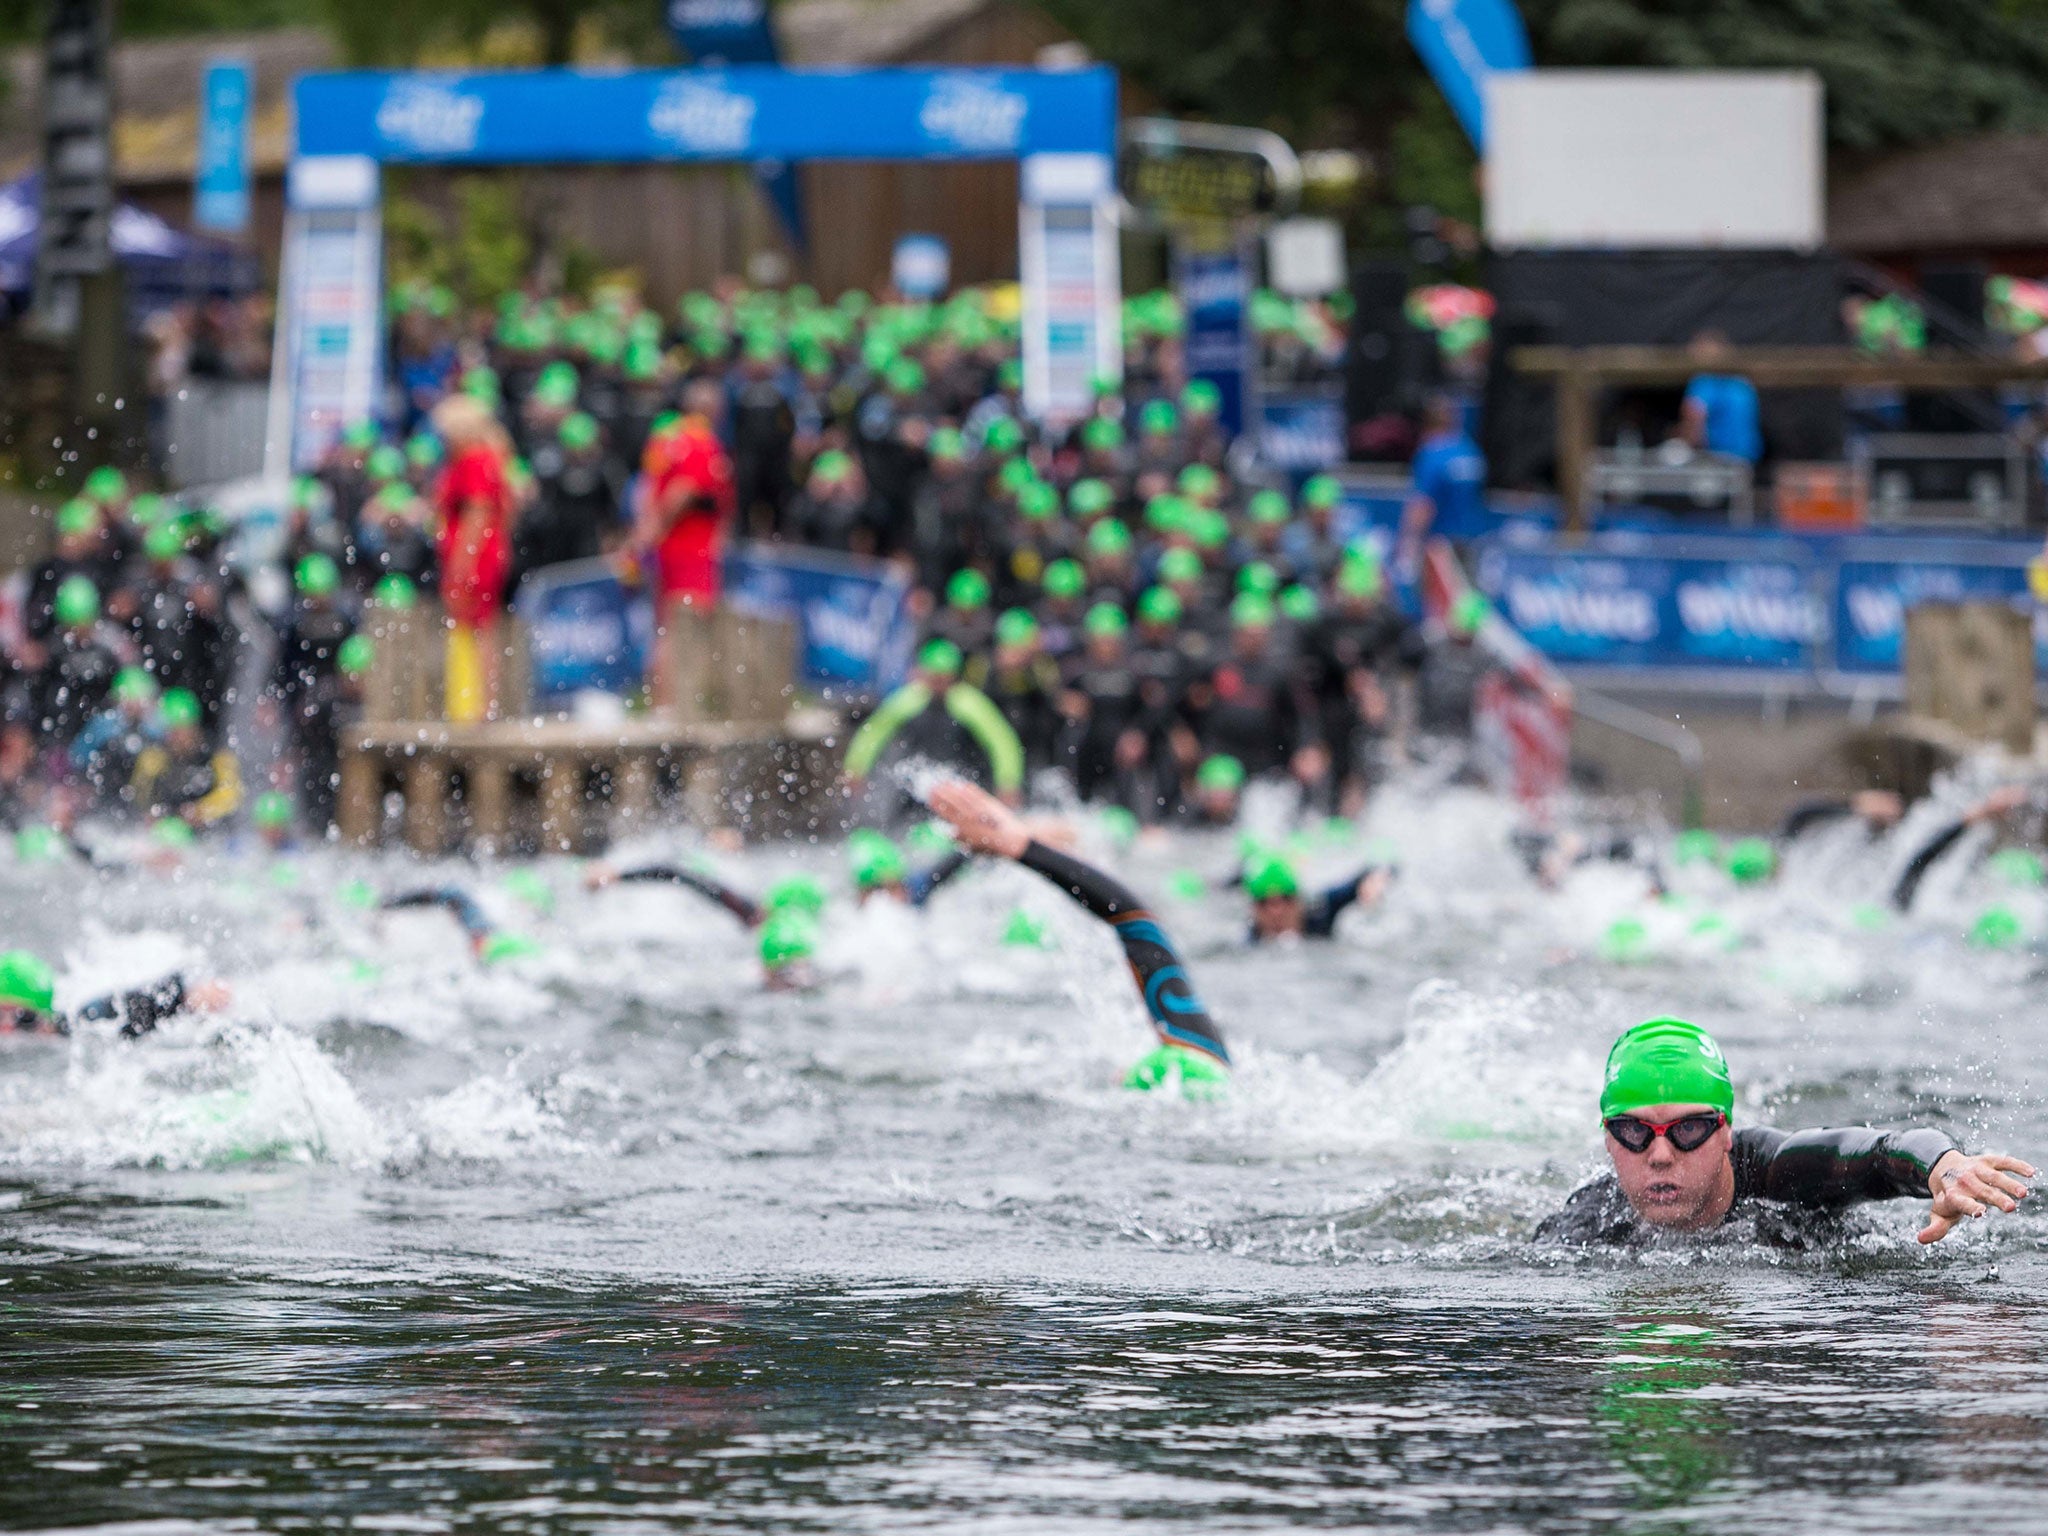 The Great North Swim 2015 at Windermere in the Lake District: some 10,000 people take part in this annual event